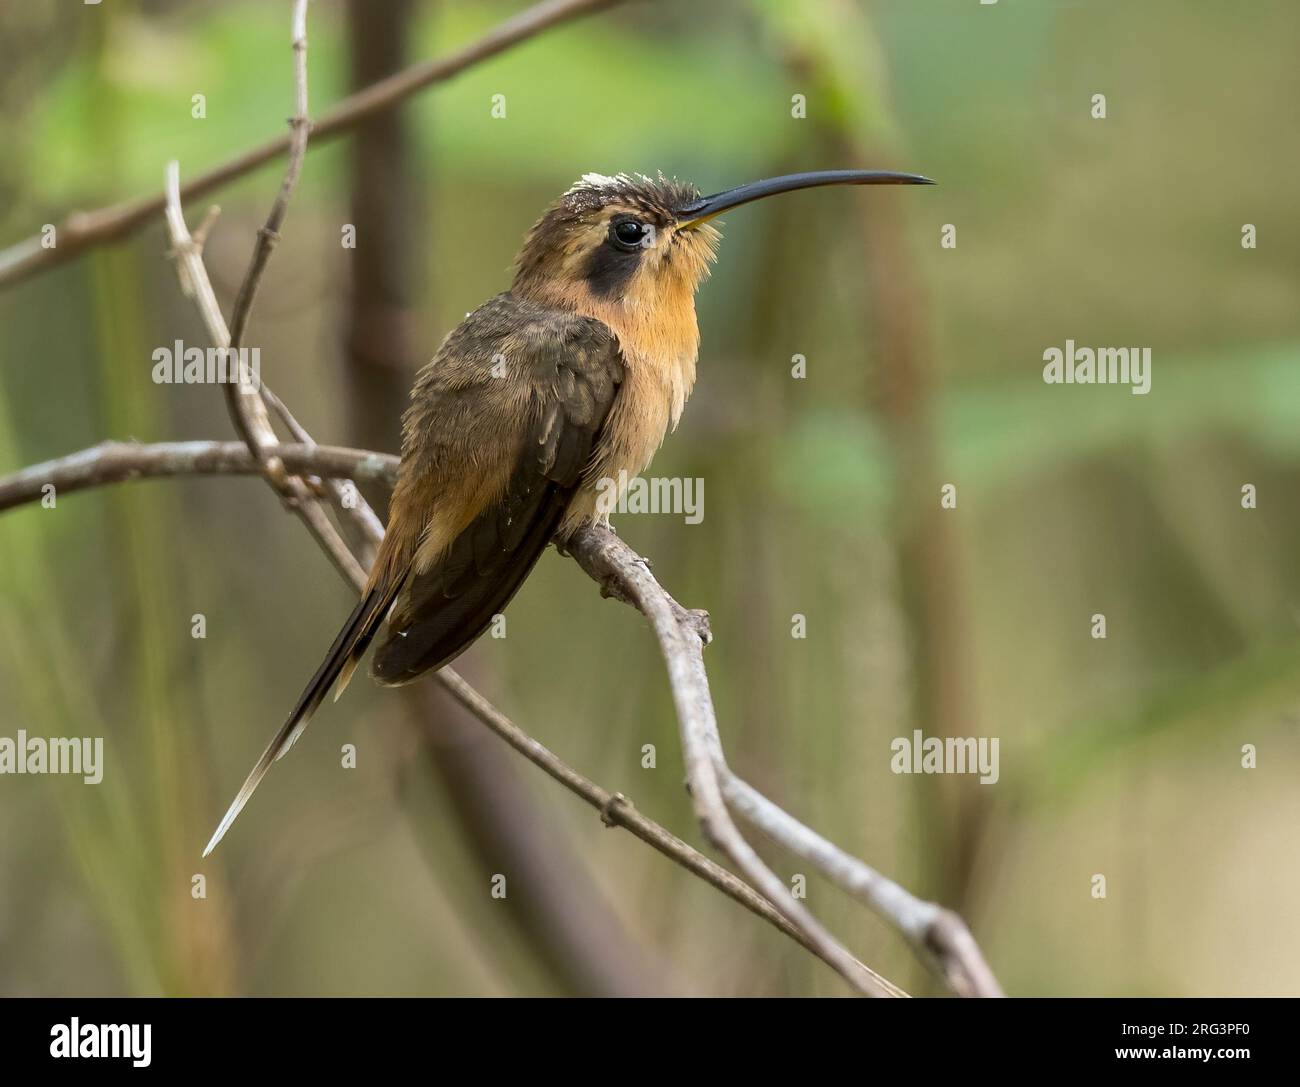 Cinnamon-throated Hermit, Phaethornis nattereri, perched on a thin branch Stock Photo